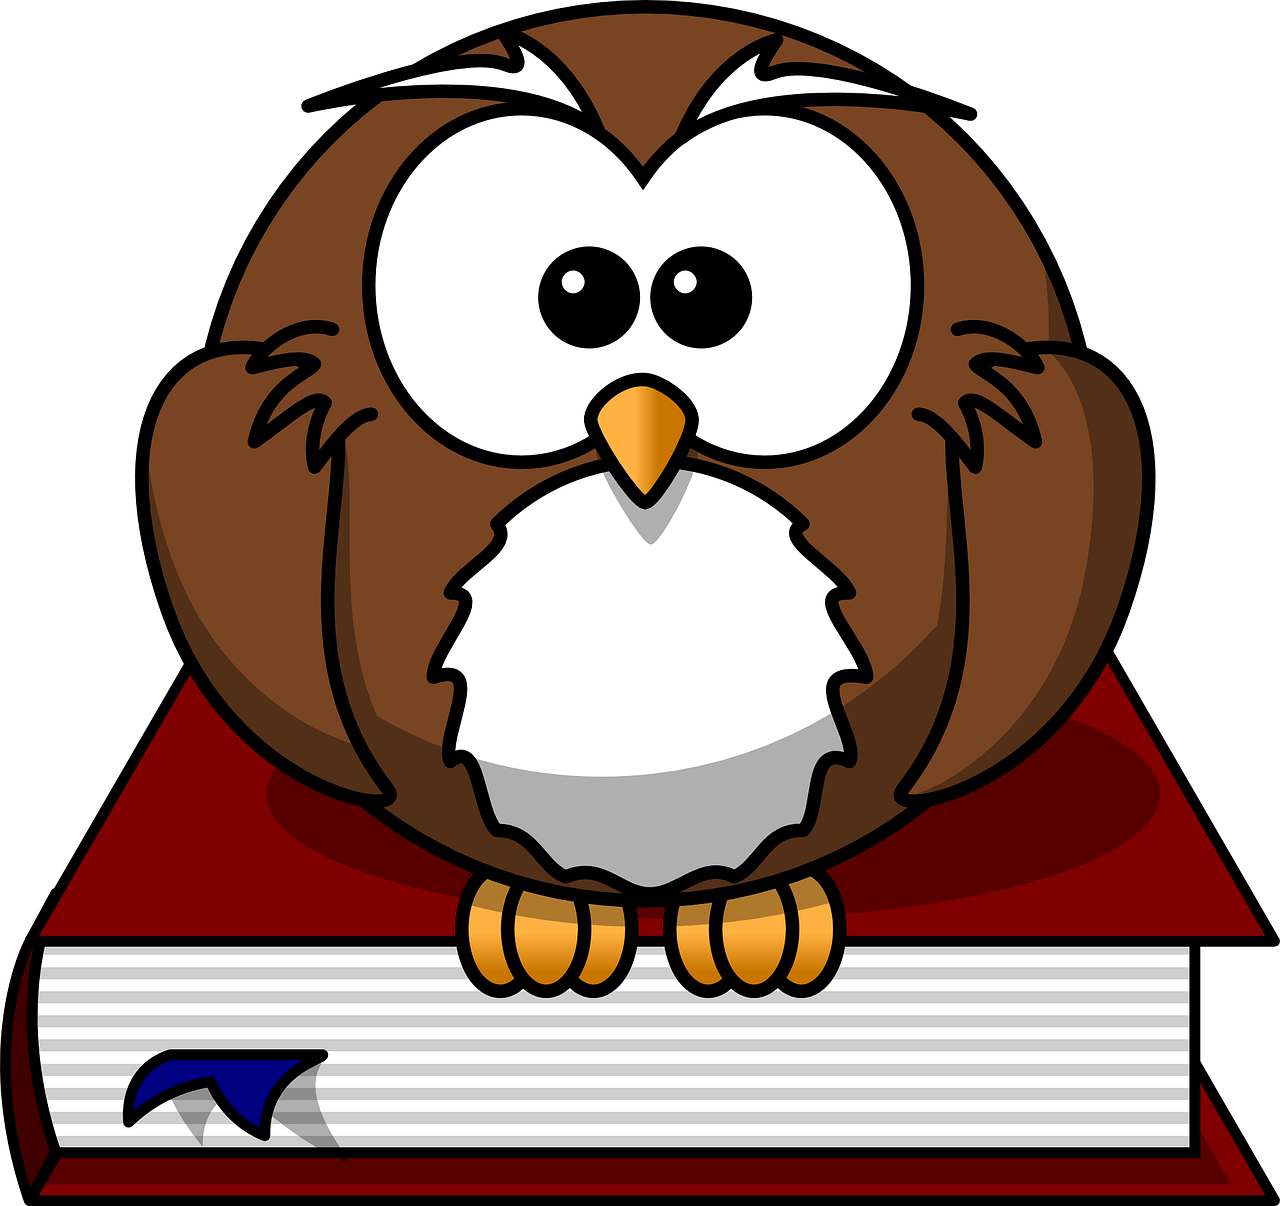 graphic of an owl on a book